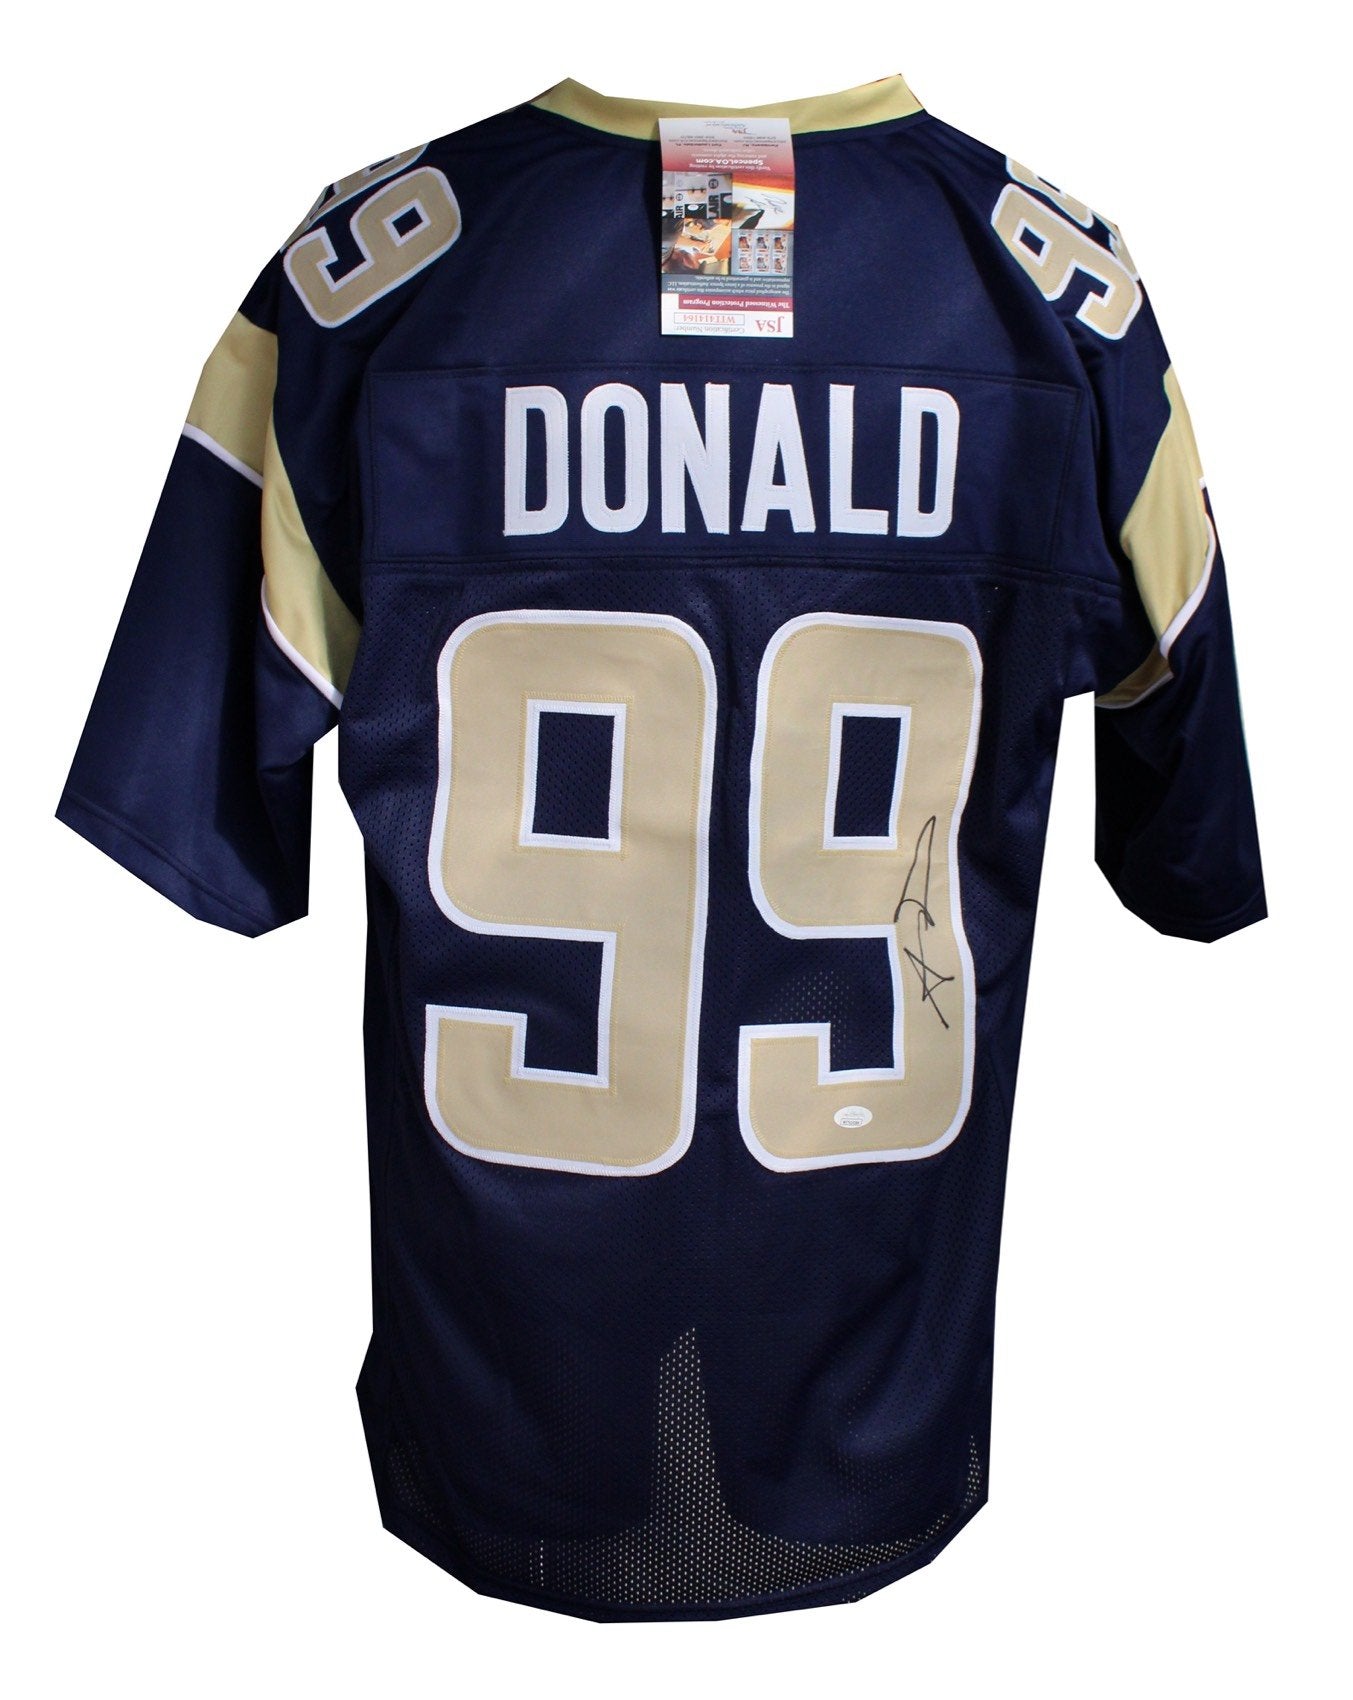 Aaron Donald 'Los Angeles Rams' Autographed Blue/Gold Custom Jersey Si –  EMPIRE SPORTS USA